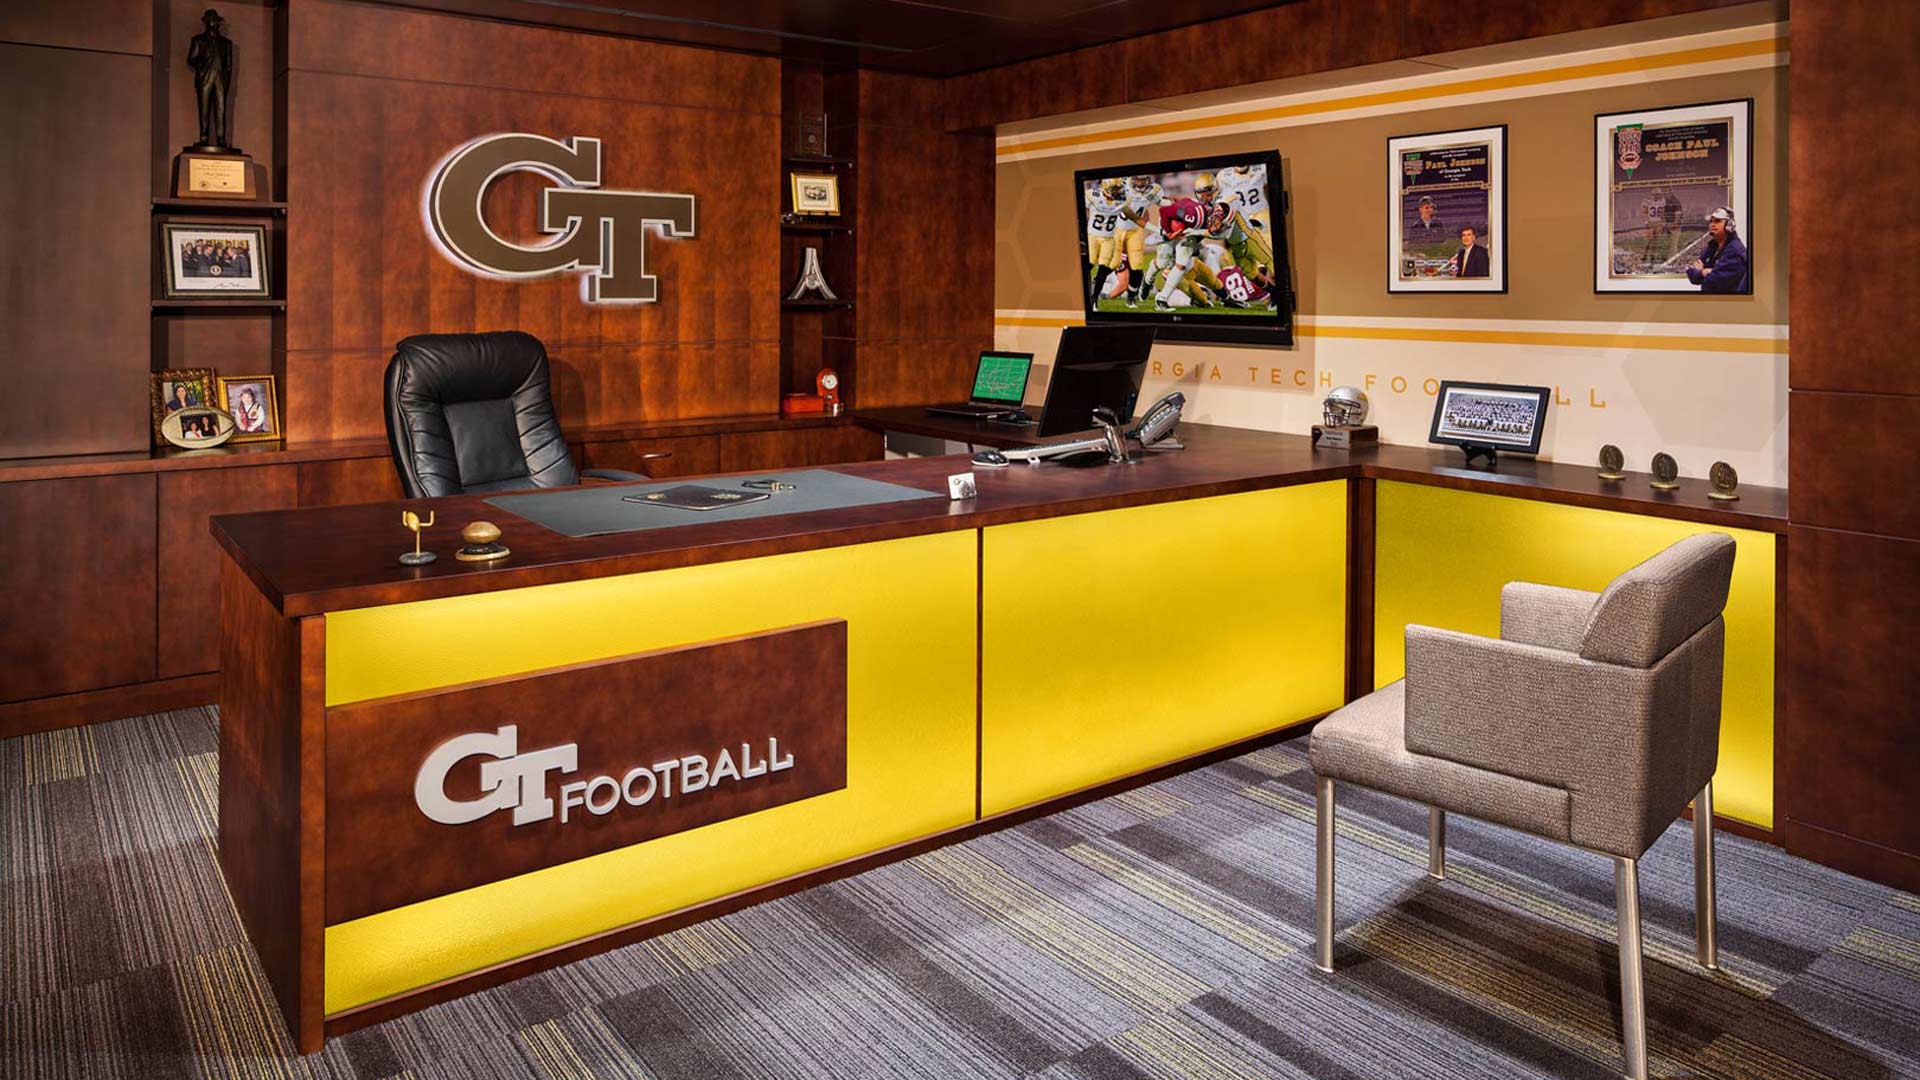 Take A Look Into Georgia Tech's Football Luxury Suites and Coaches' Offices  | Moss